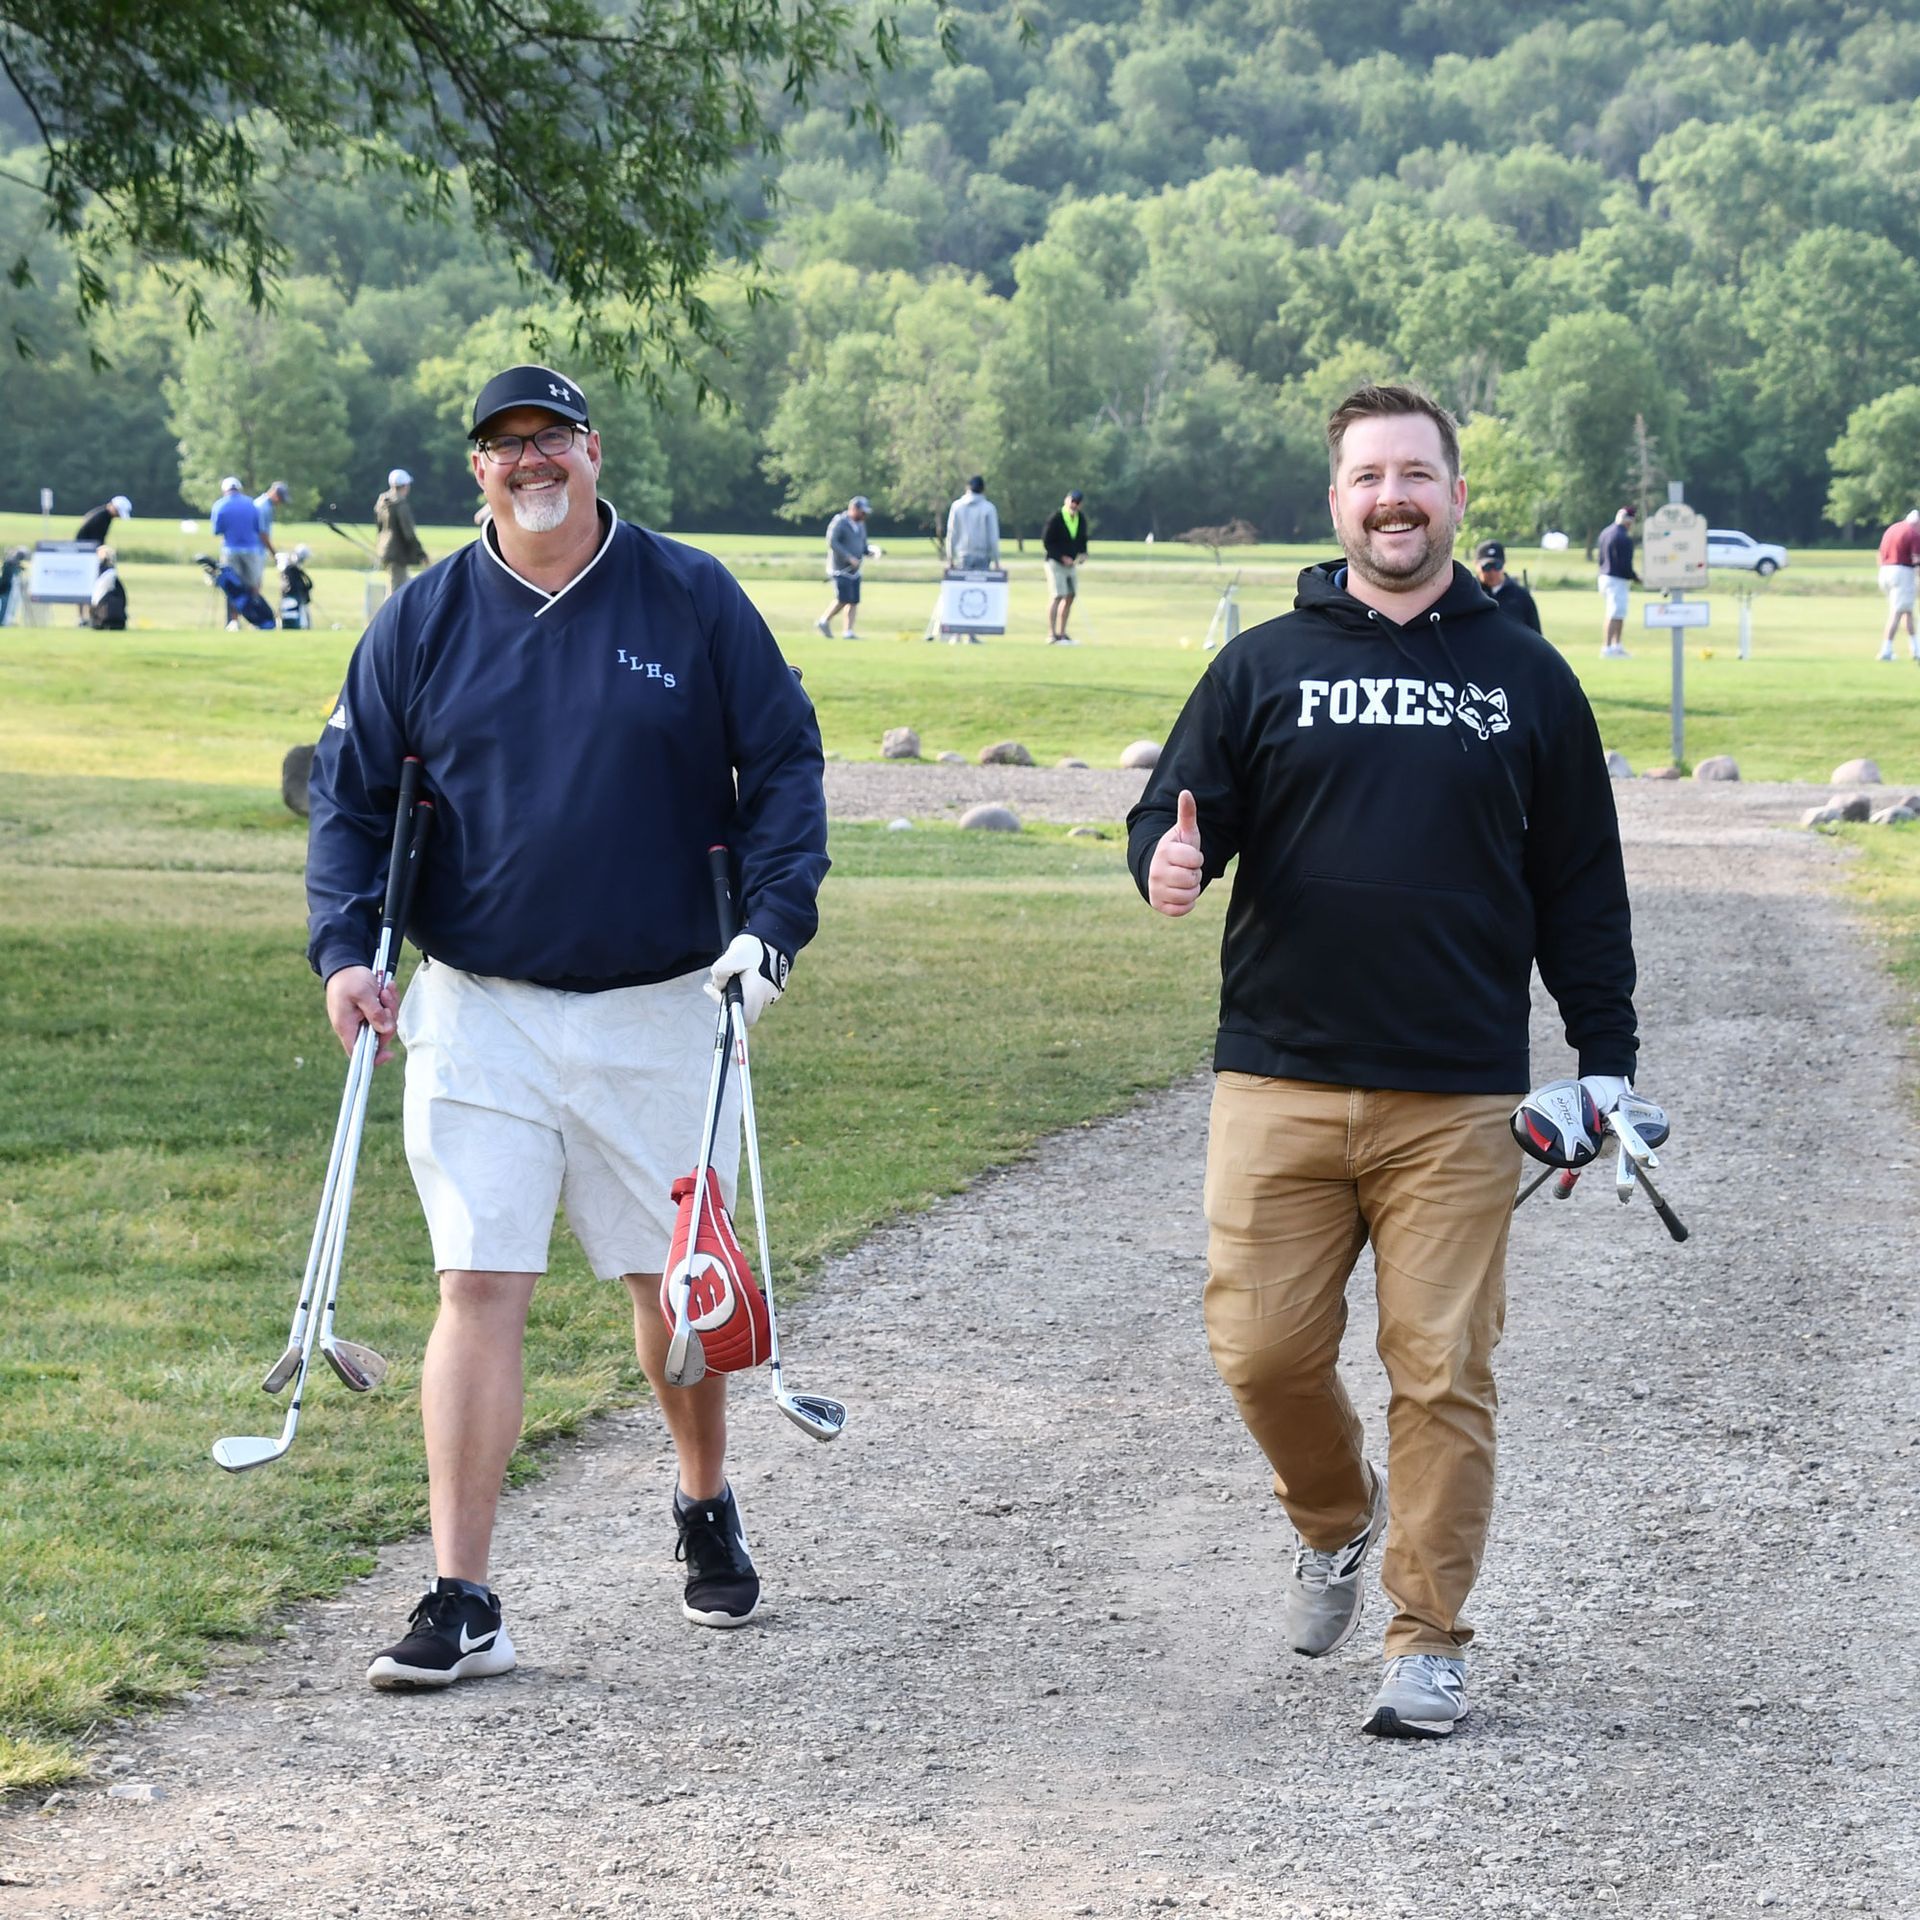 Mr. Uhlenbrauck and Mr. Dorn walking on the path, smiling and carrying golf clubs.